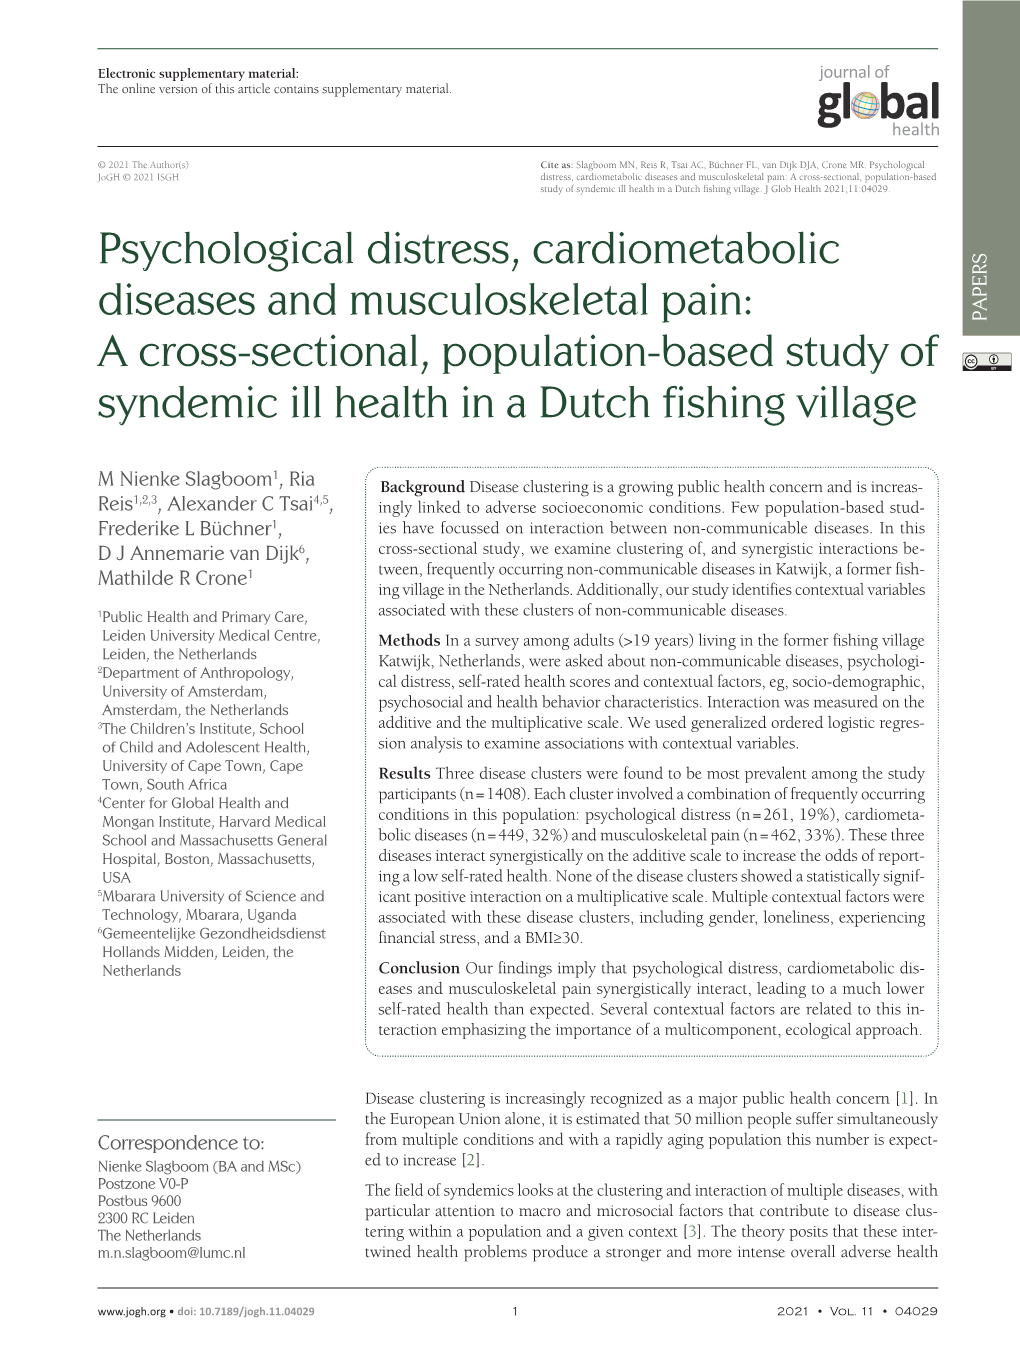 Psychological Distress, Cardiometabolic Diseases and Musculoskeletal Pain